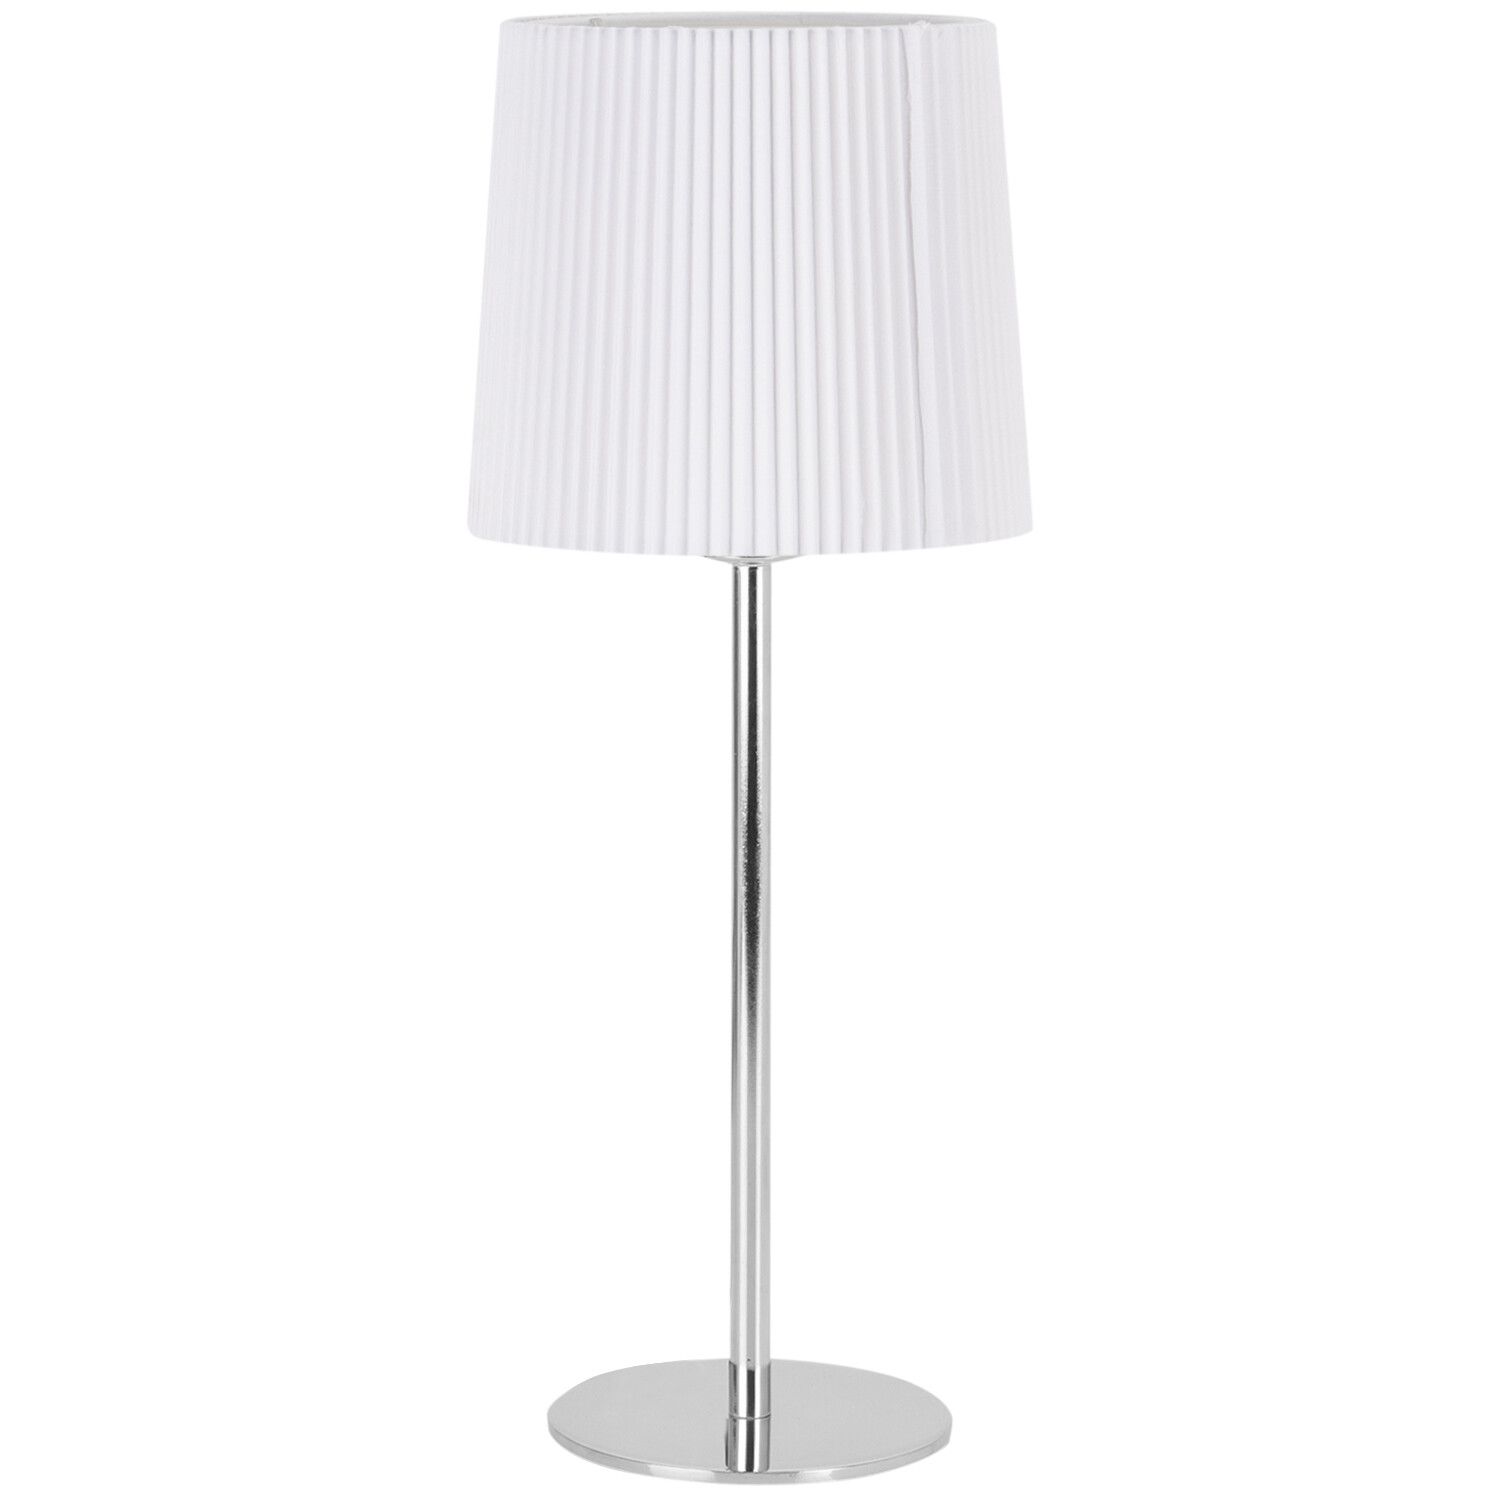 Single Hana Table Lamp in Assorted styles Image 2